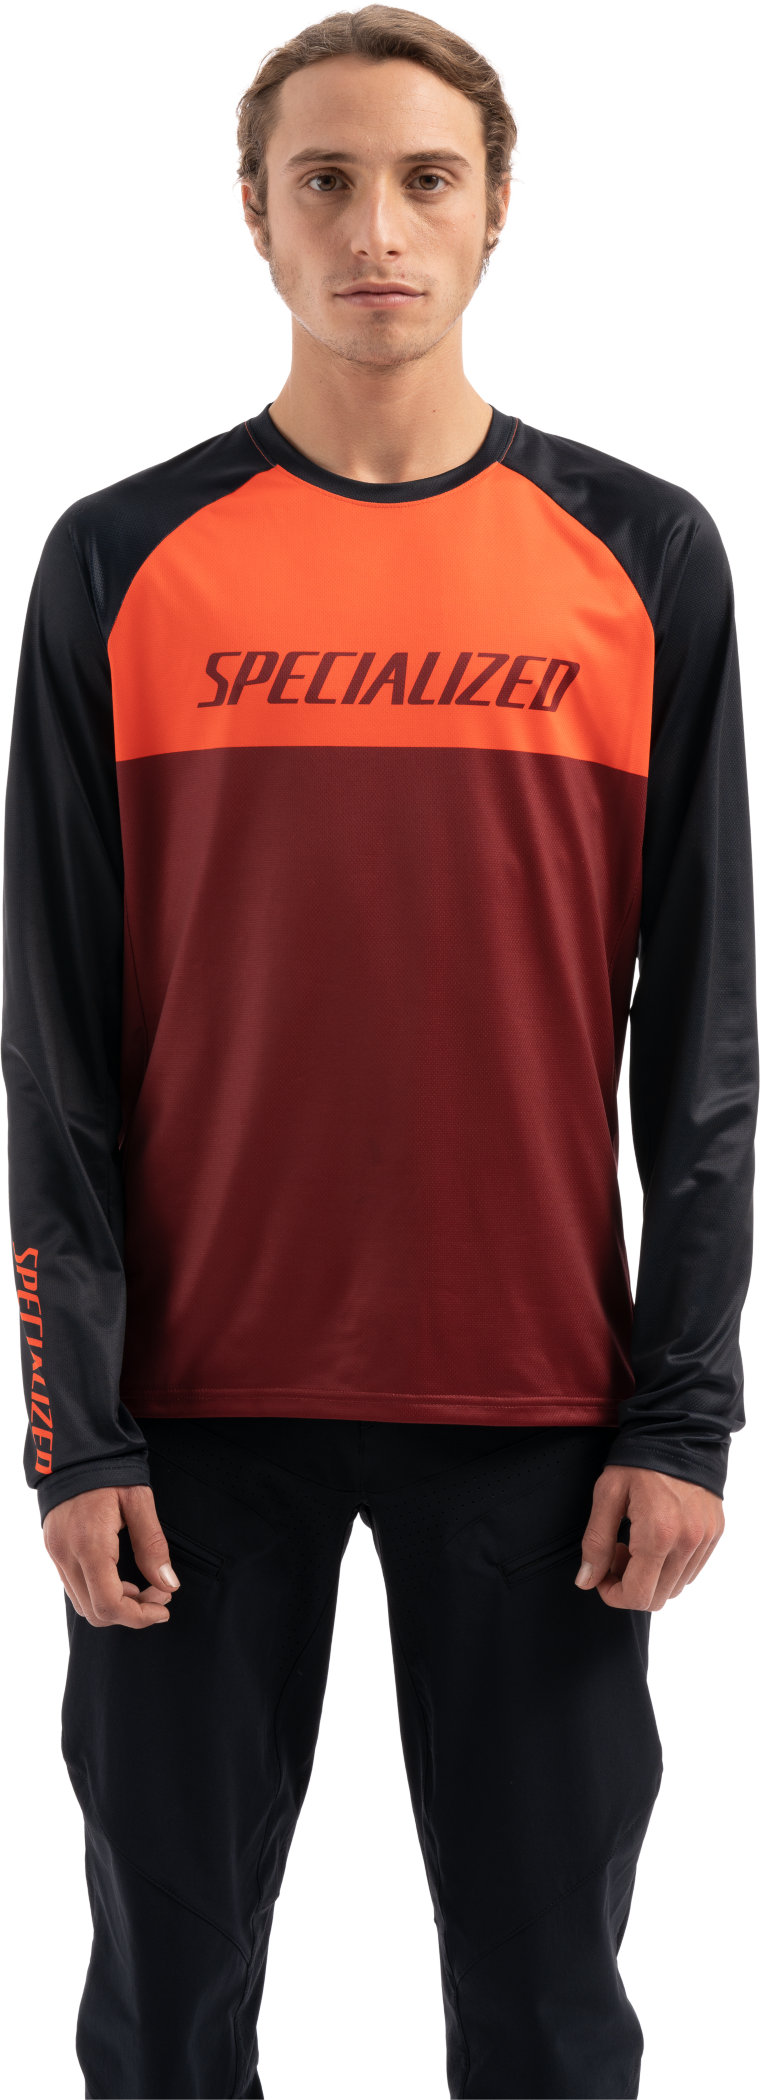 specialized demo pro jersey